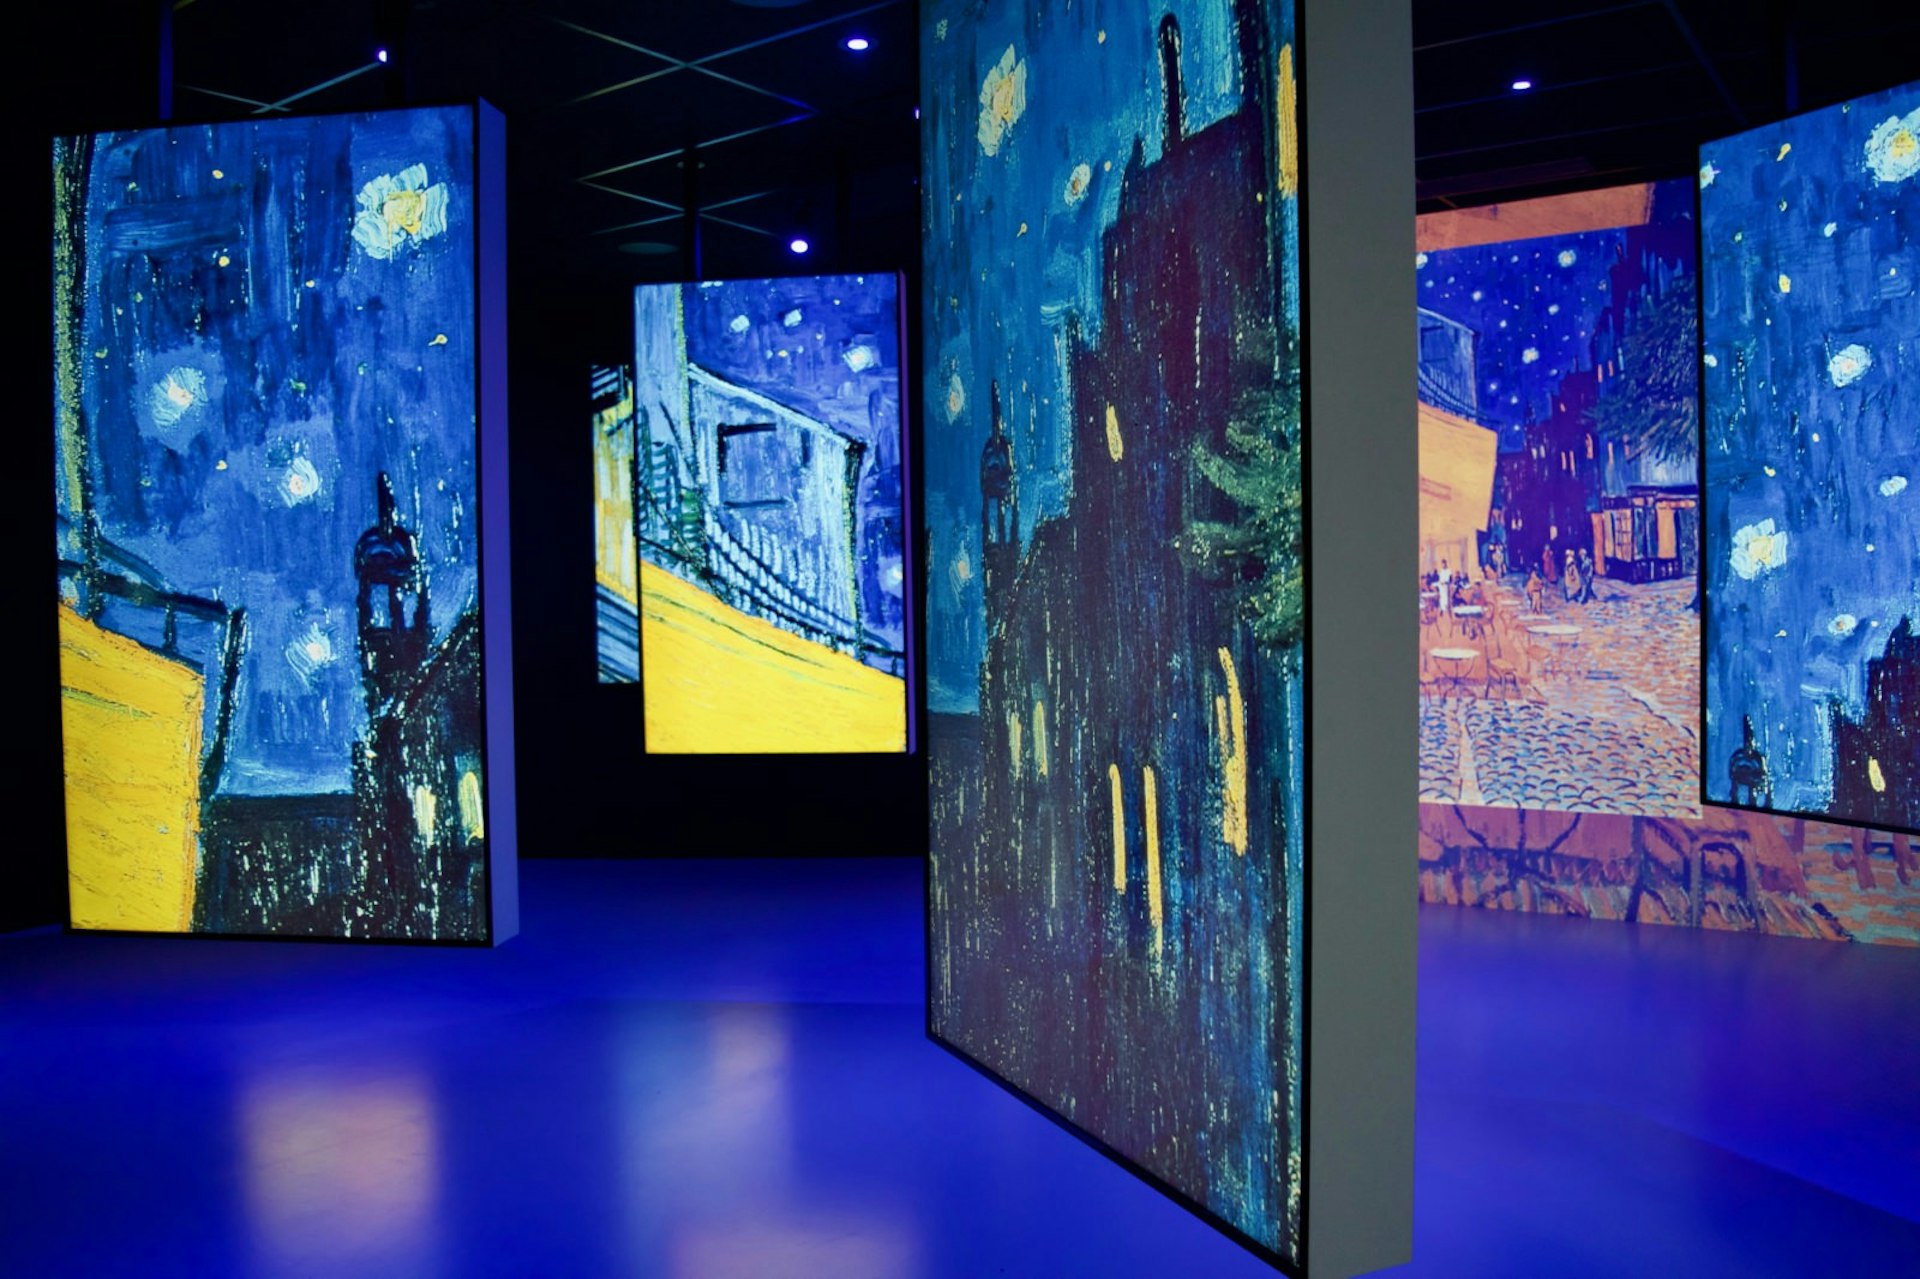 Enlarged facsimiles of Van Gogh's artwork hang in a darkened room as part of The Impressionist Vision exhibition at Château d’Auvers-sur-Oise © Janine Eberle / Lonely Planet